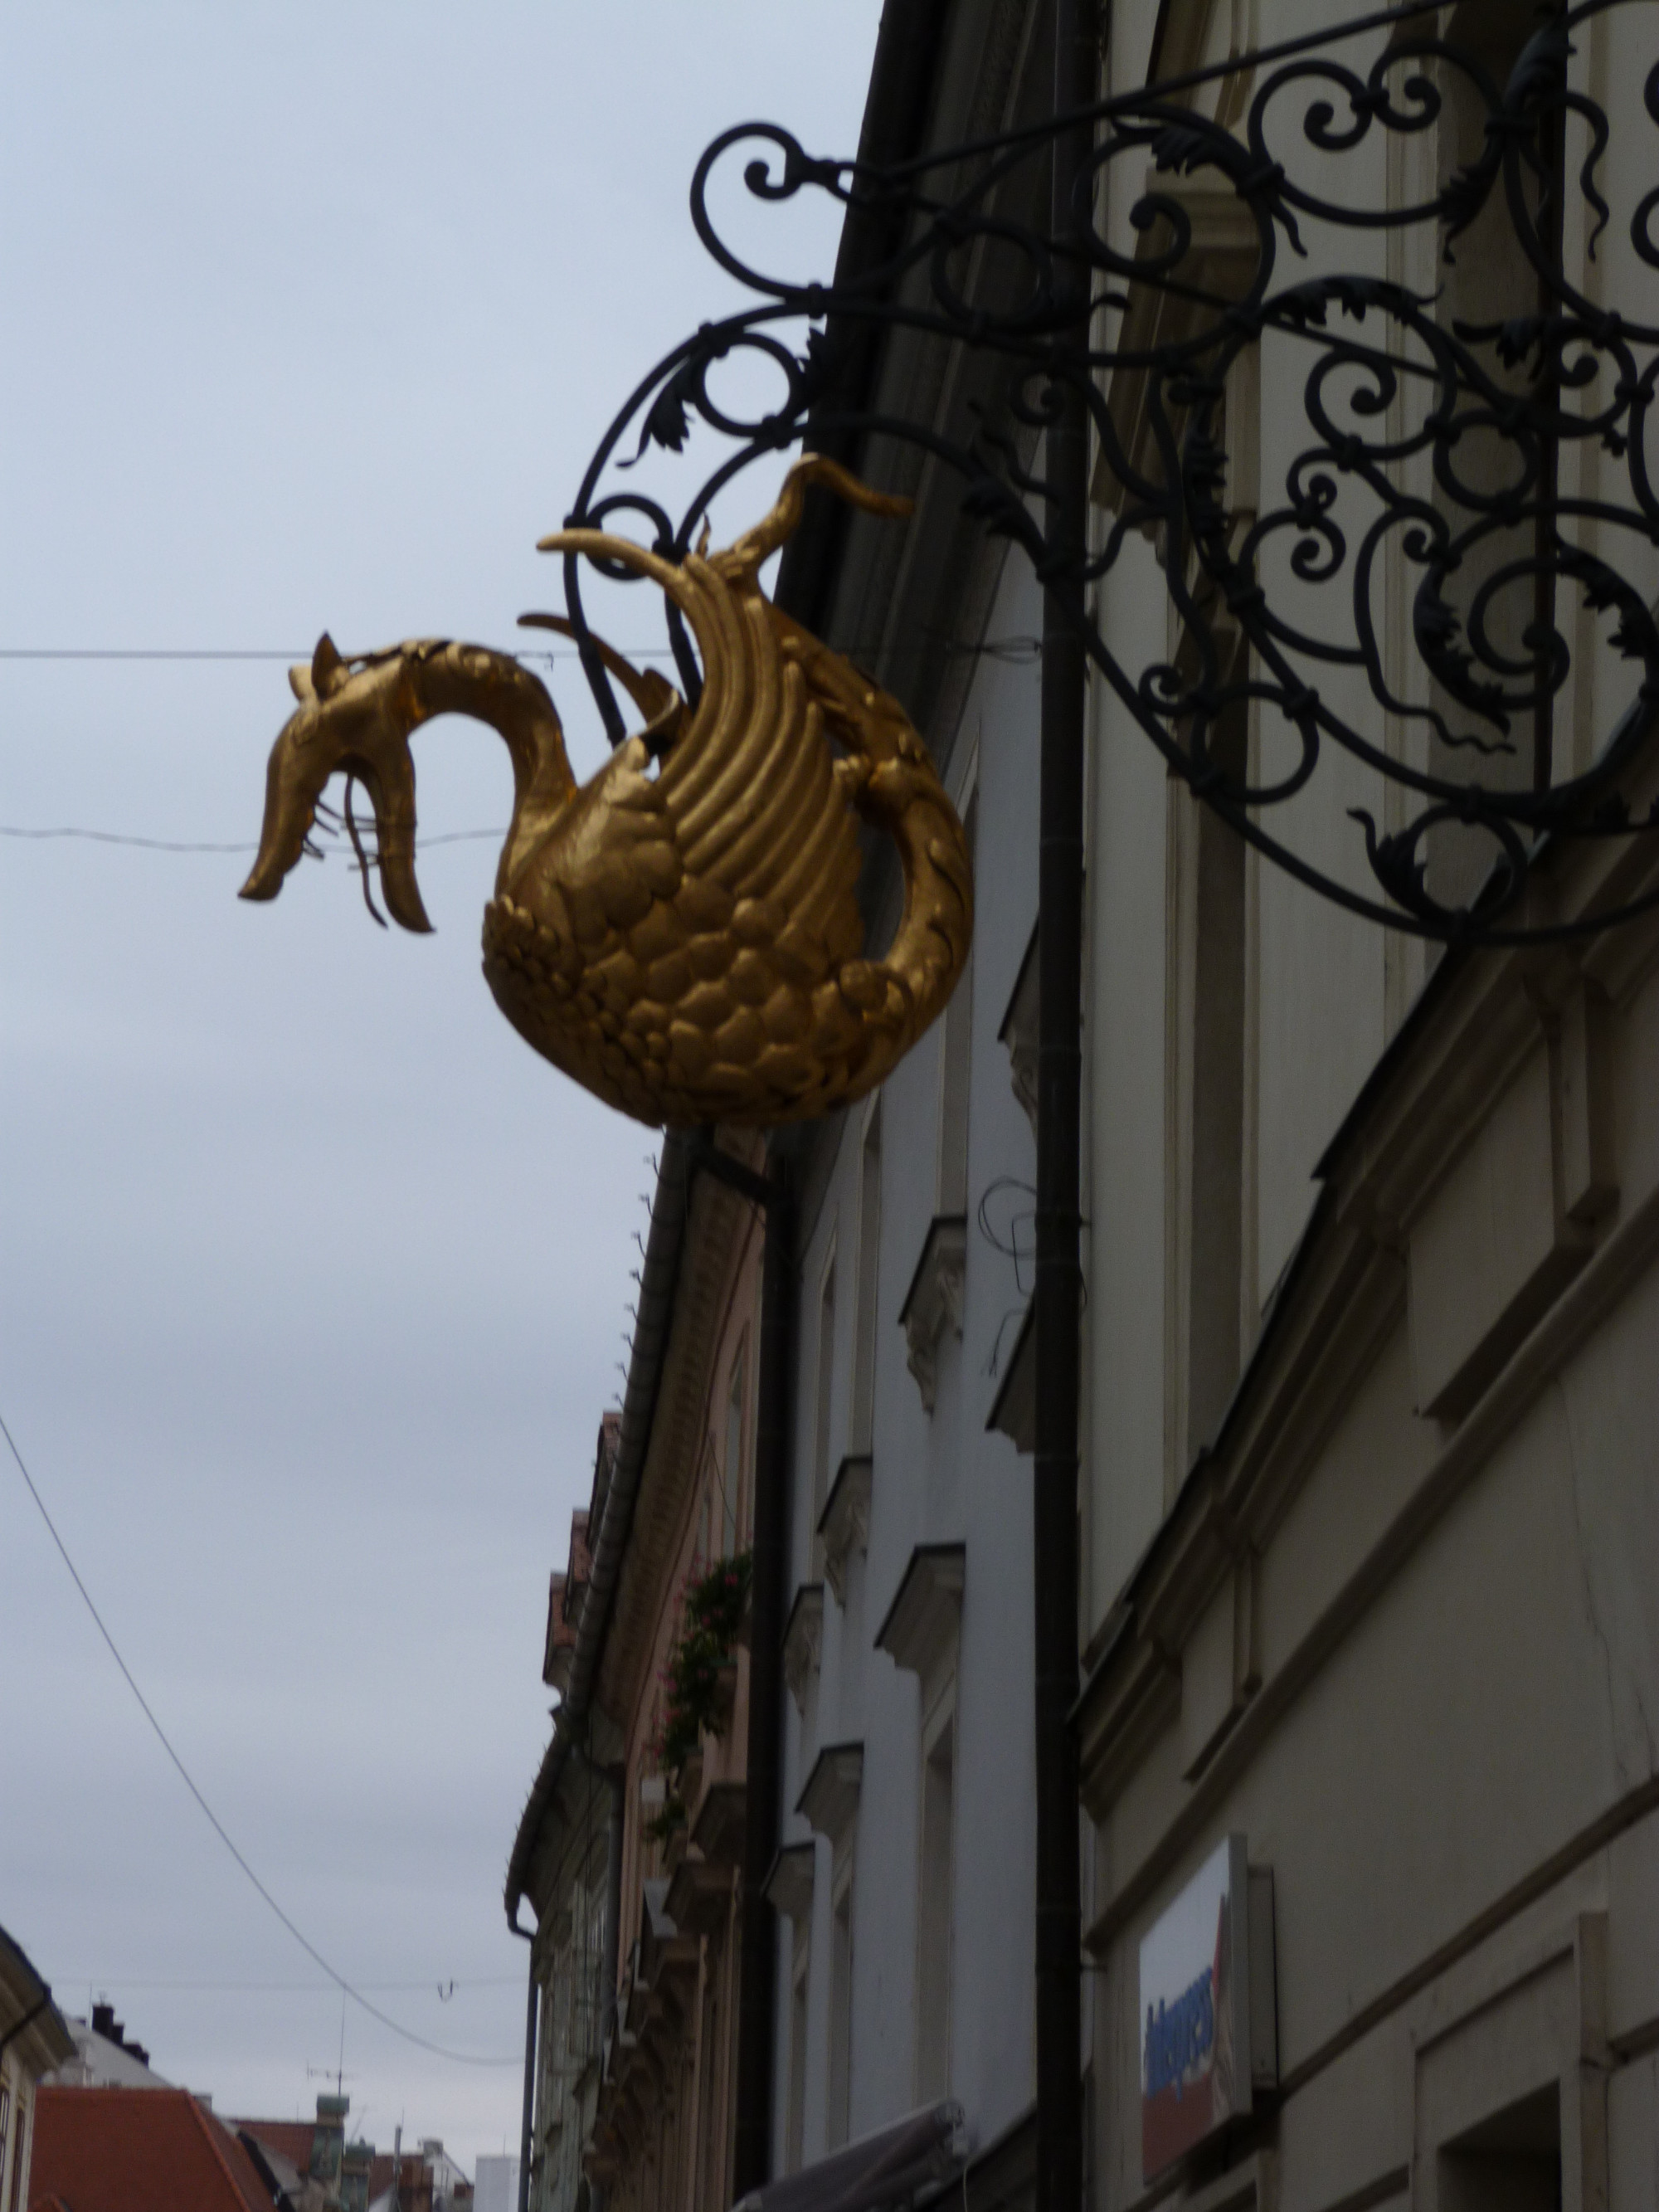 Golden Dragon hanging above a pharmacy